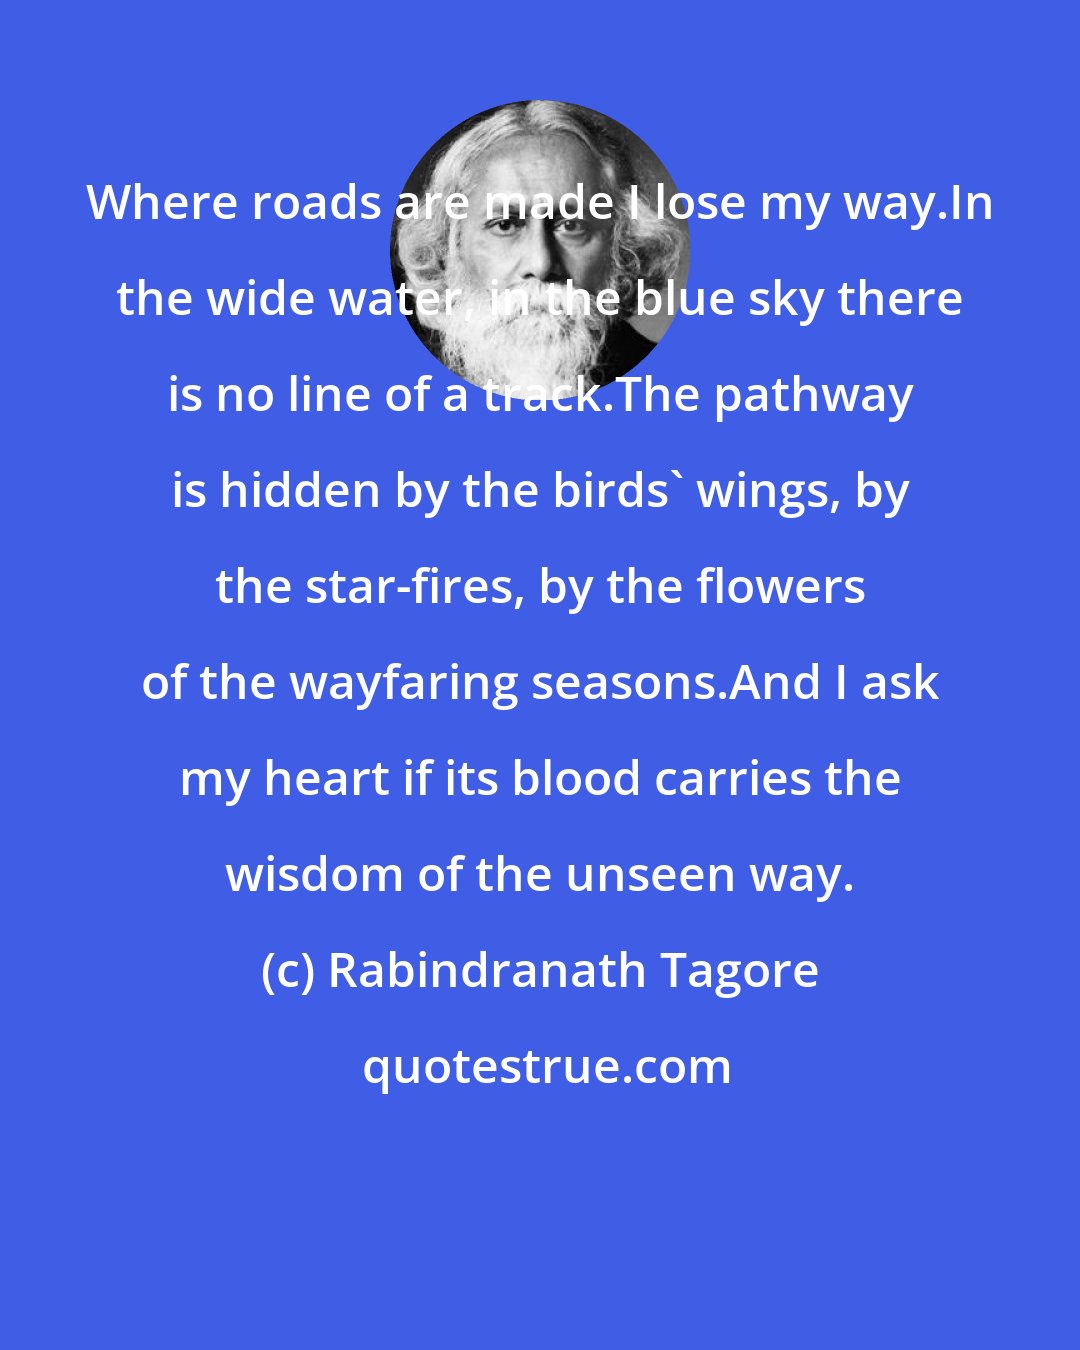 Rabindranath Tagore: Where roads are made I lose my way.In the wide water, in the blue sky there is no line of a track.The pathway is hidden by the birds' wings, by the star-fires, by the flowers of the wayfaring seasons.And I ask my heart if its blood carries the wisdom of the unseen way.